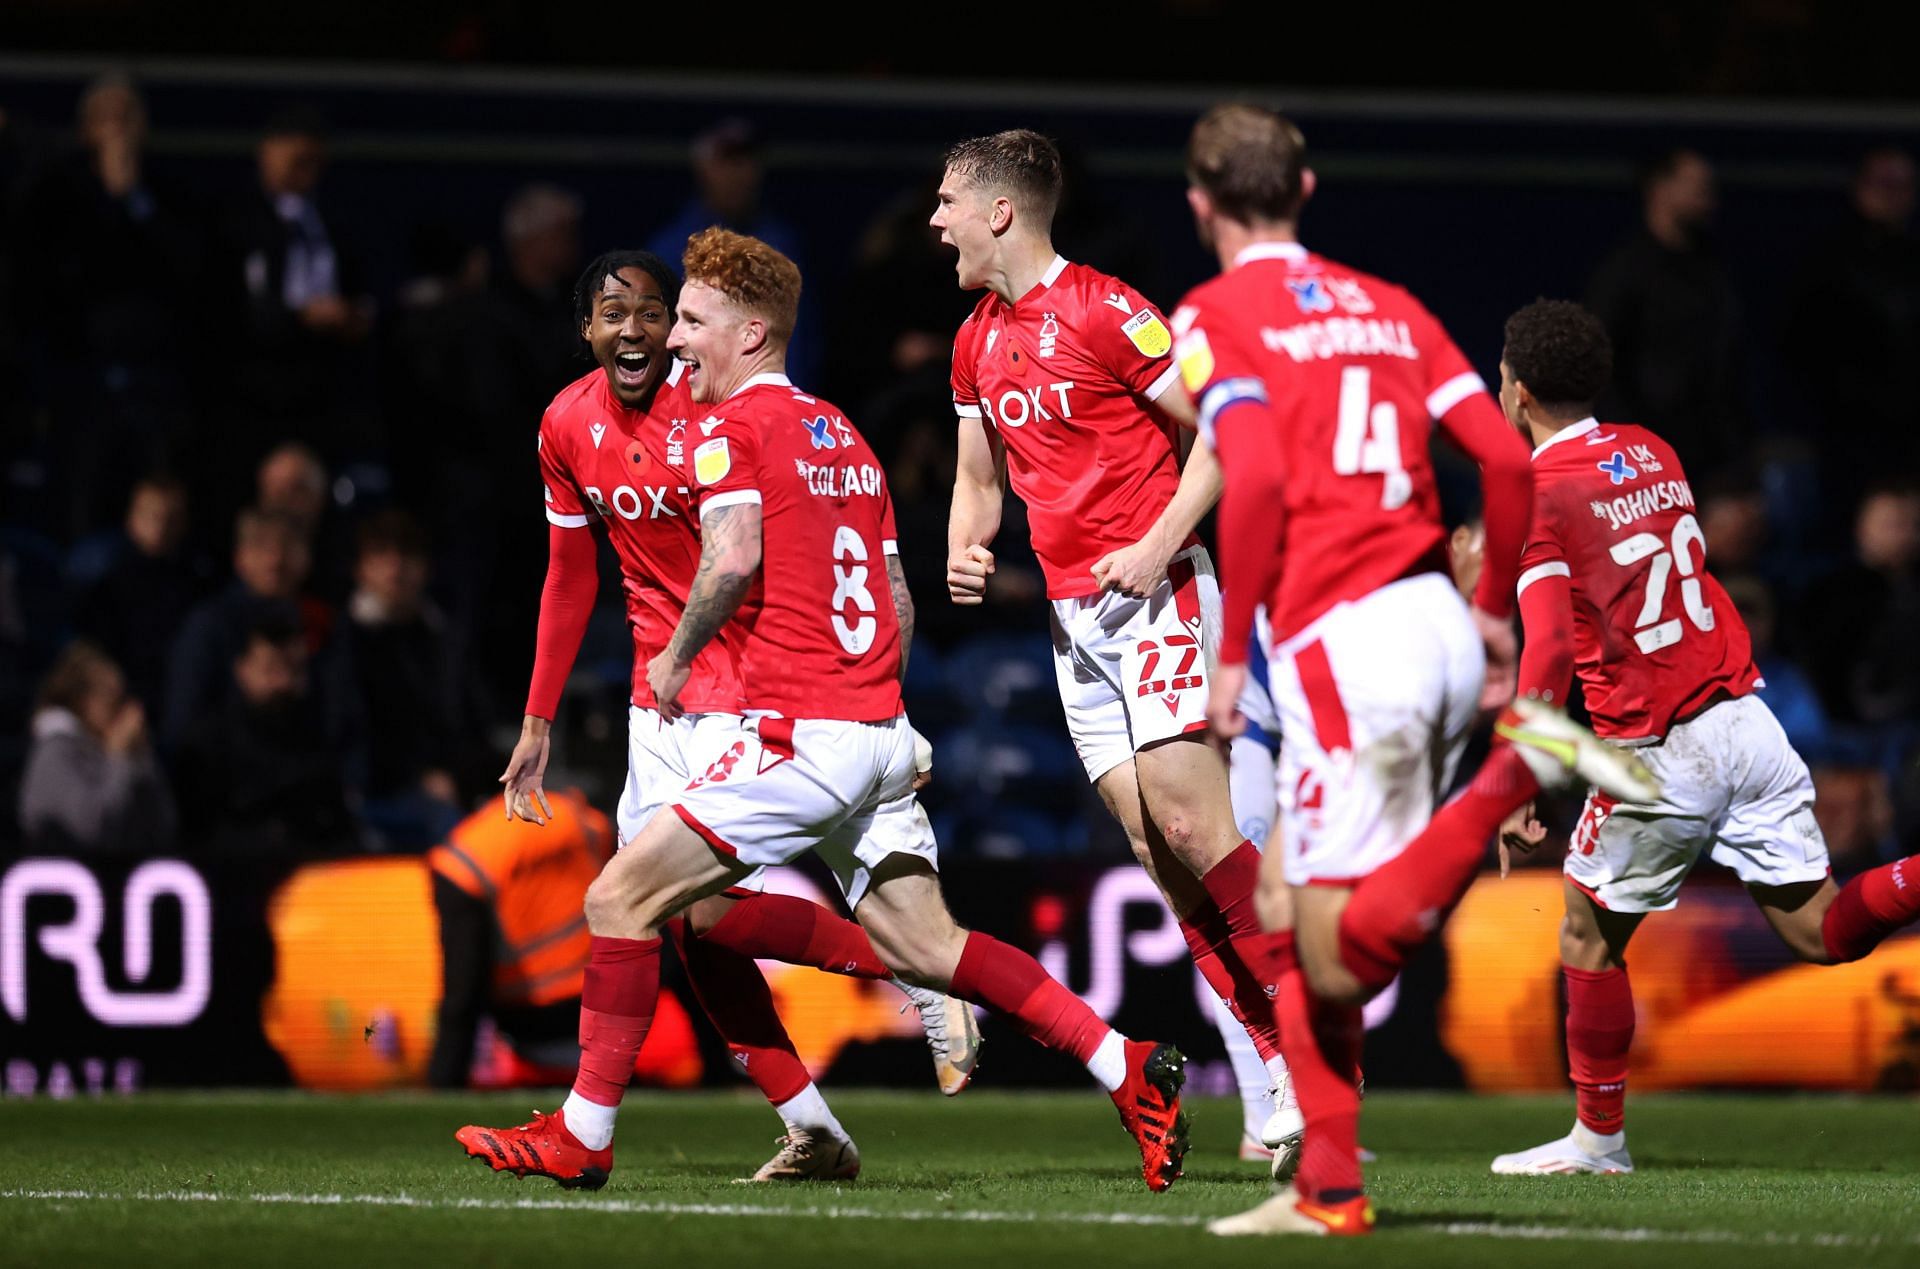 Nottingham Forest will square off with Preston North End